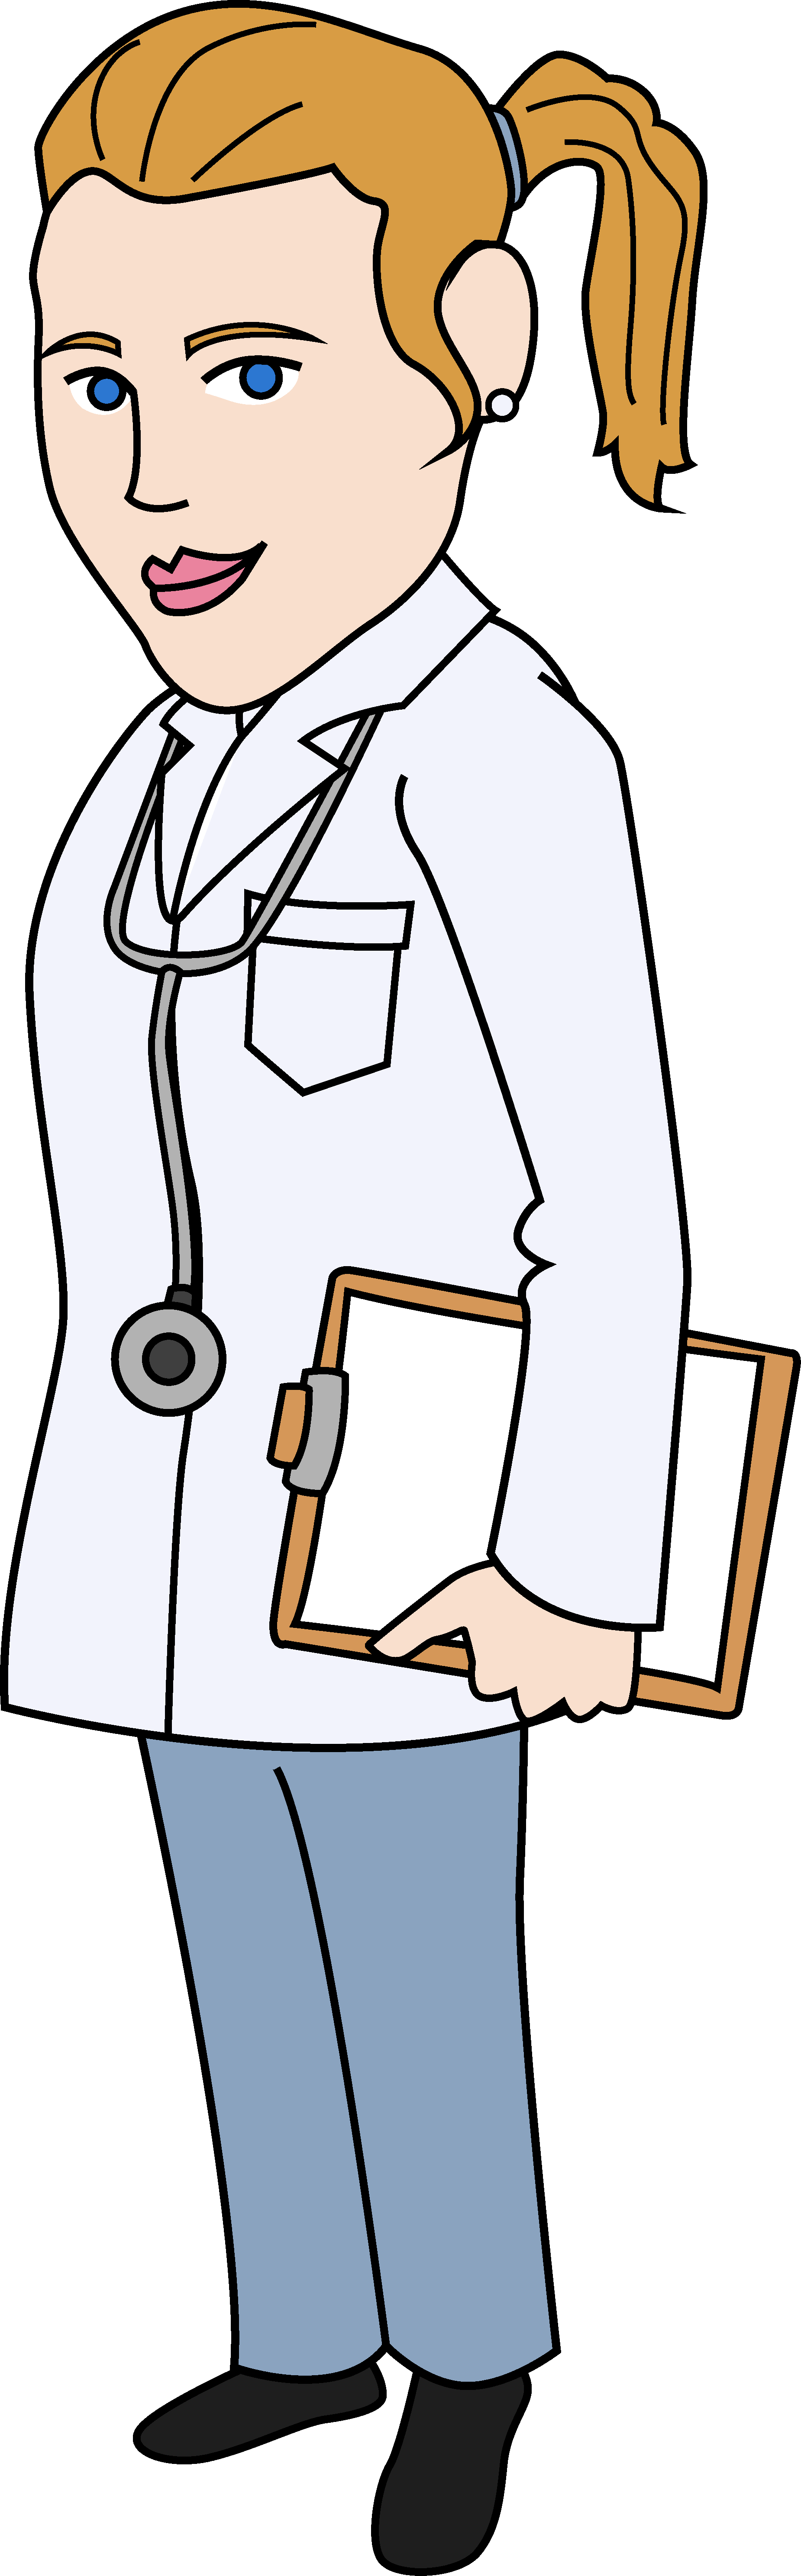 Free Clipart Doctor - Clip Art Doctor